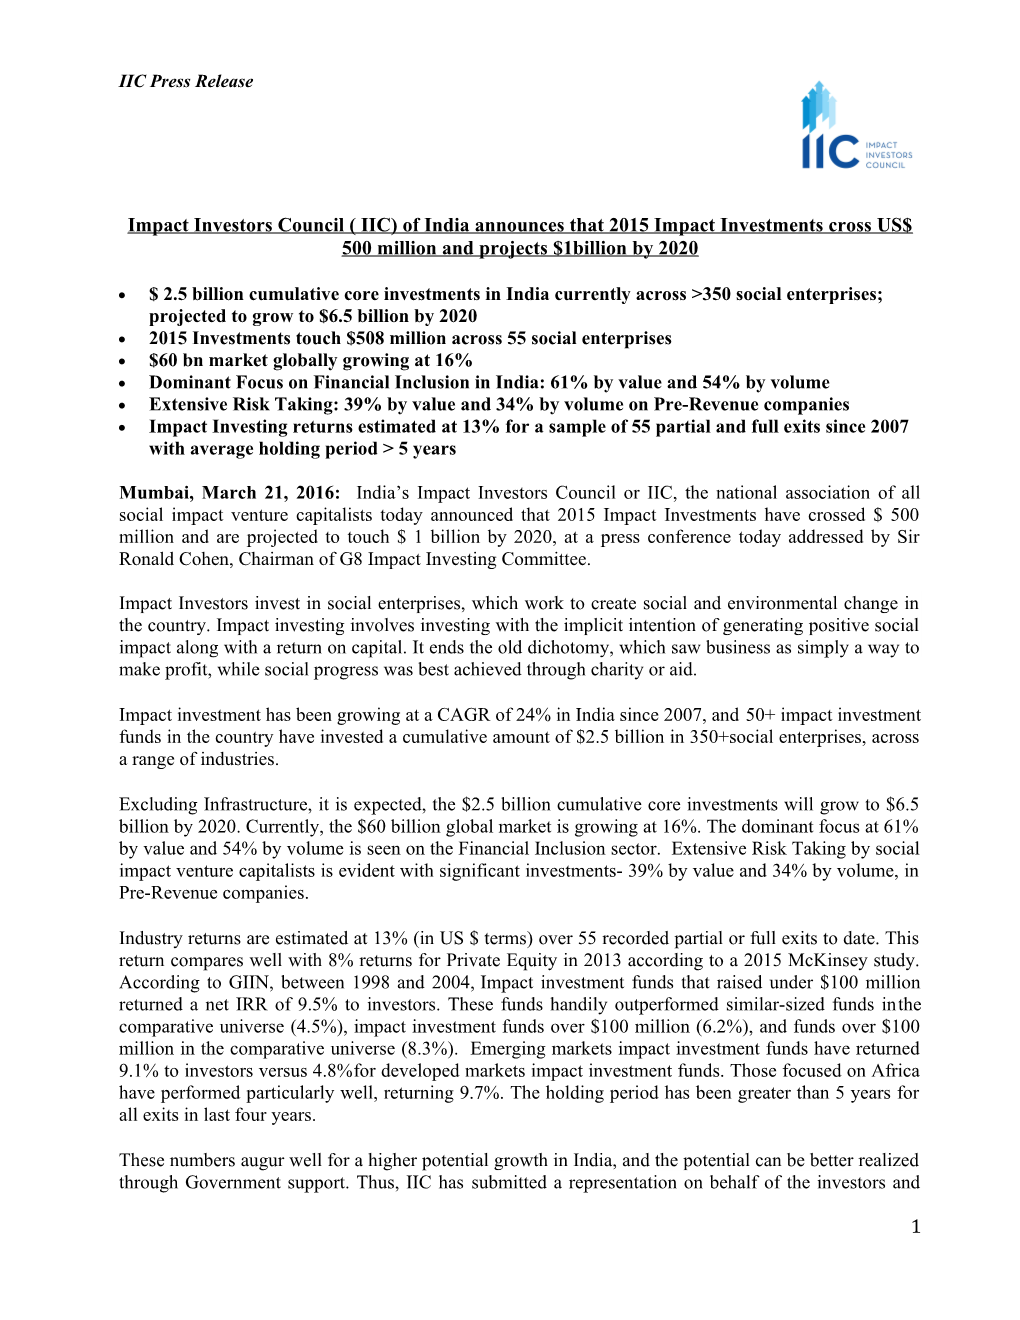 Impact Investors Council ( IIC) of India Announces That 2015 Impact Investments Cross